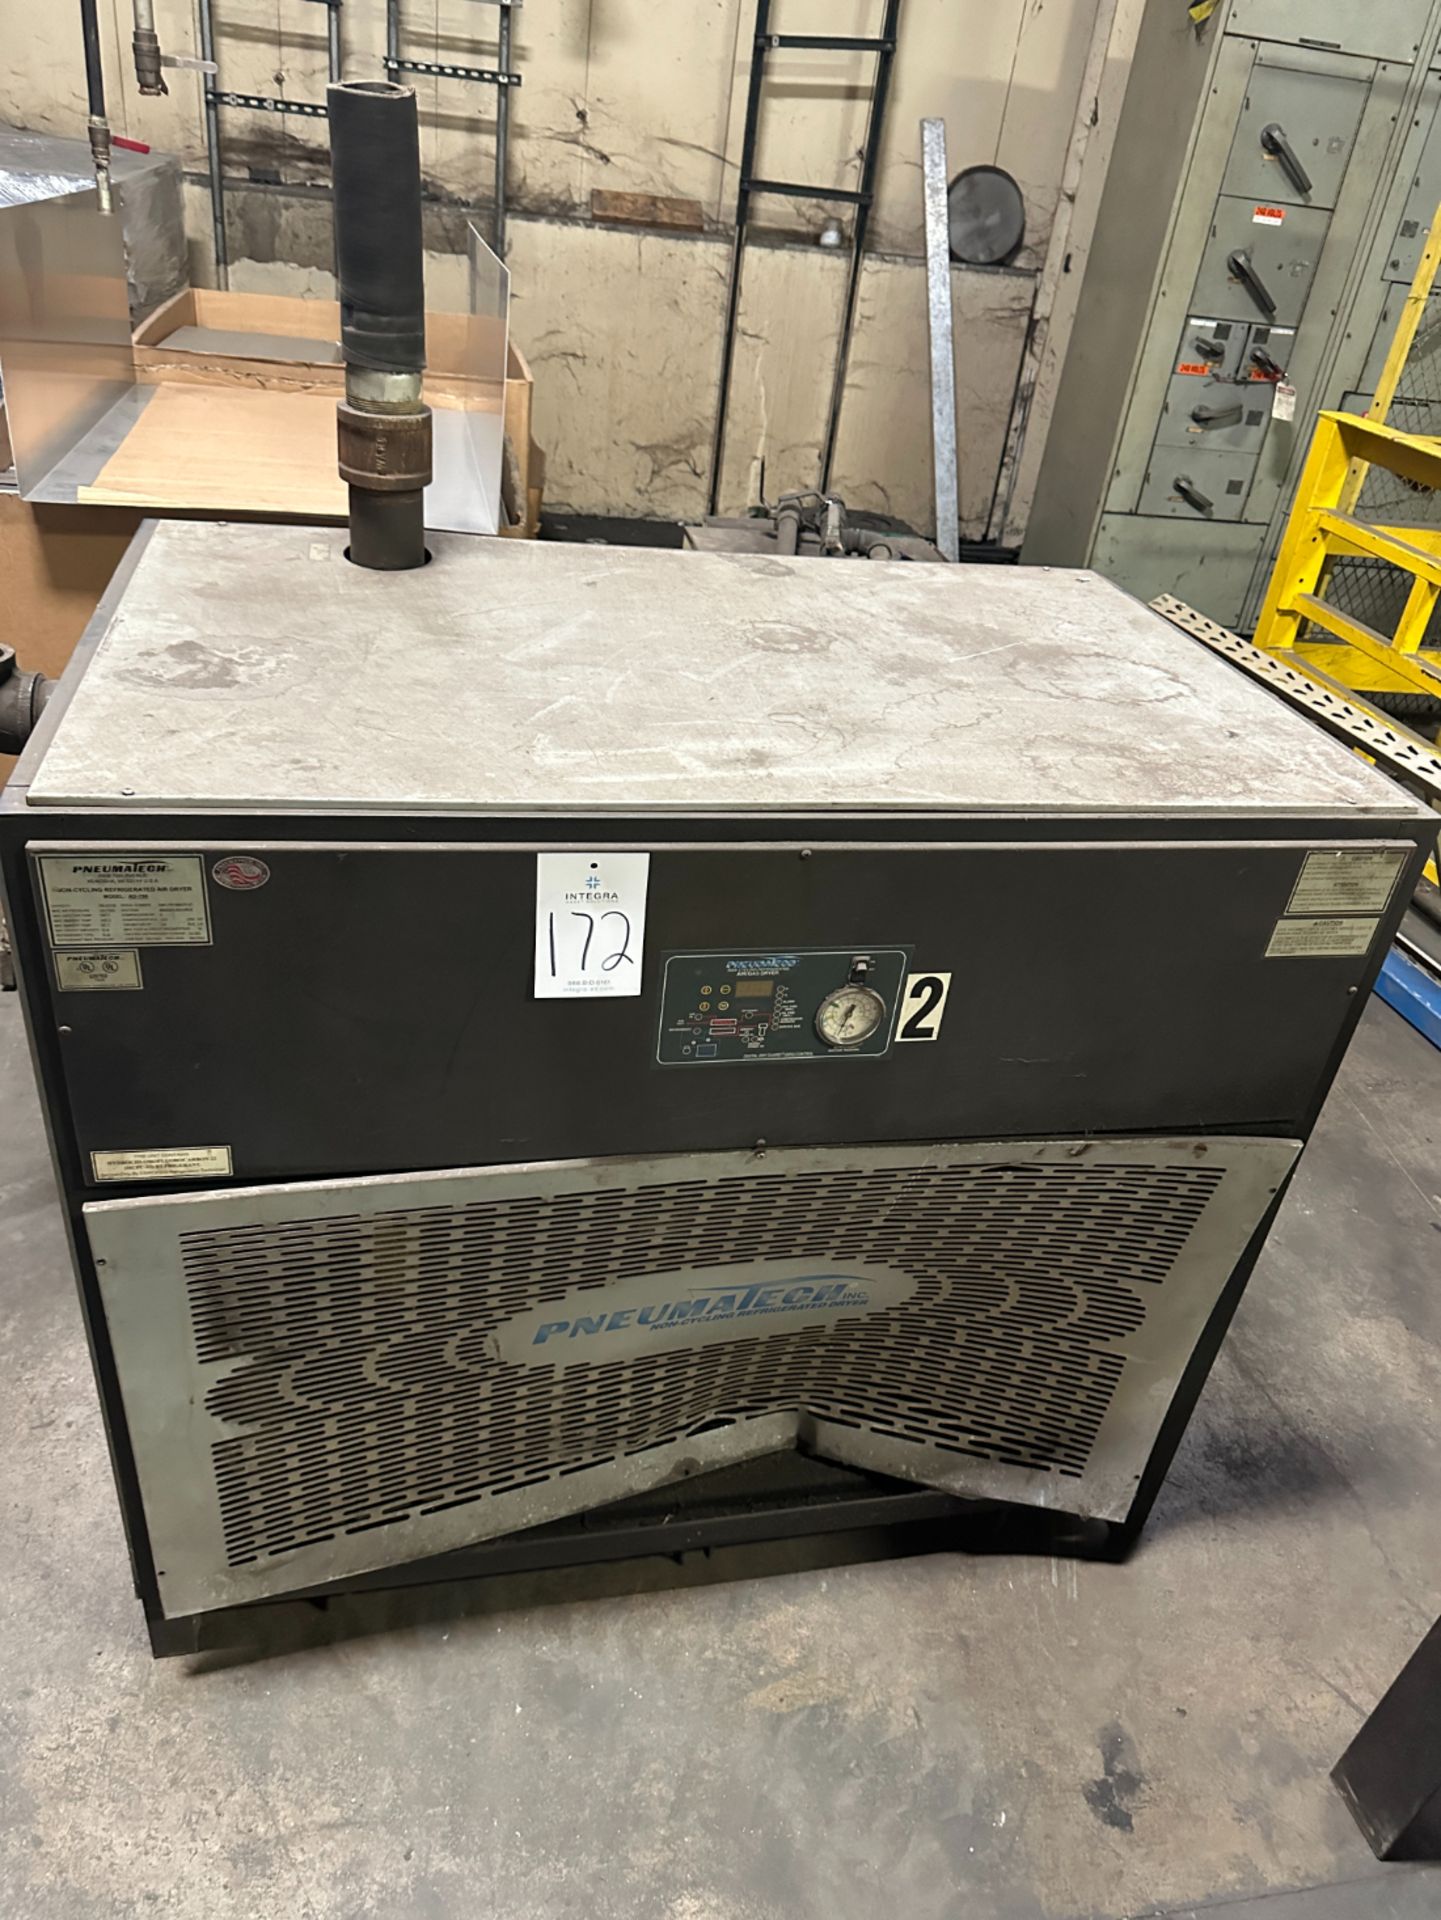 Pneumatech AD-750 Refrigerated Air Dryer, S/N 0401-TR139927P-ST